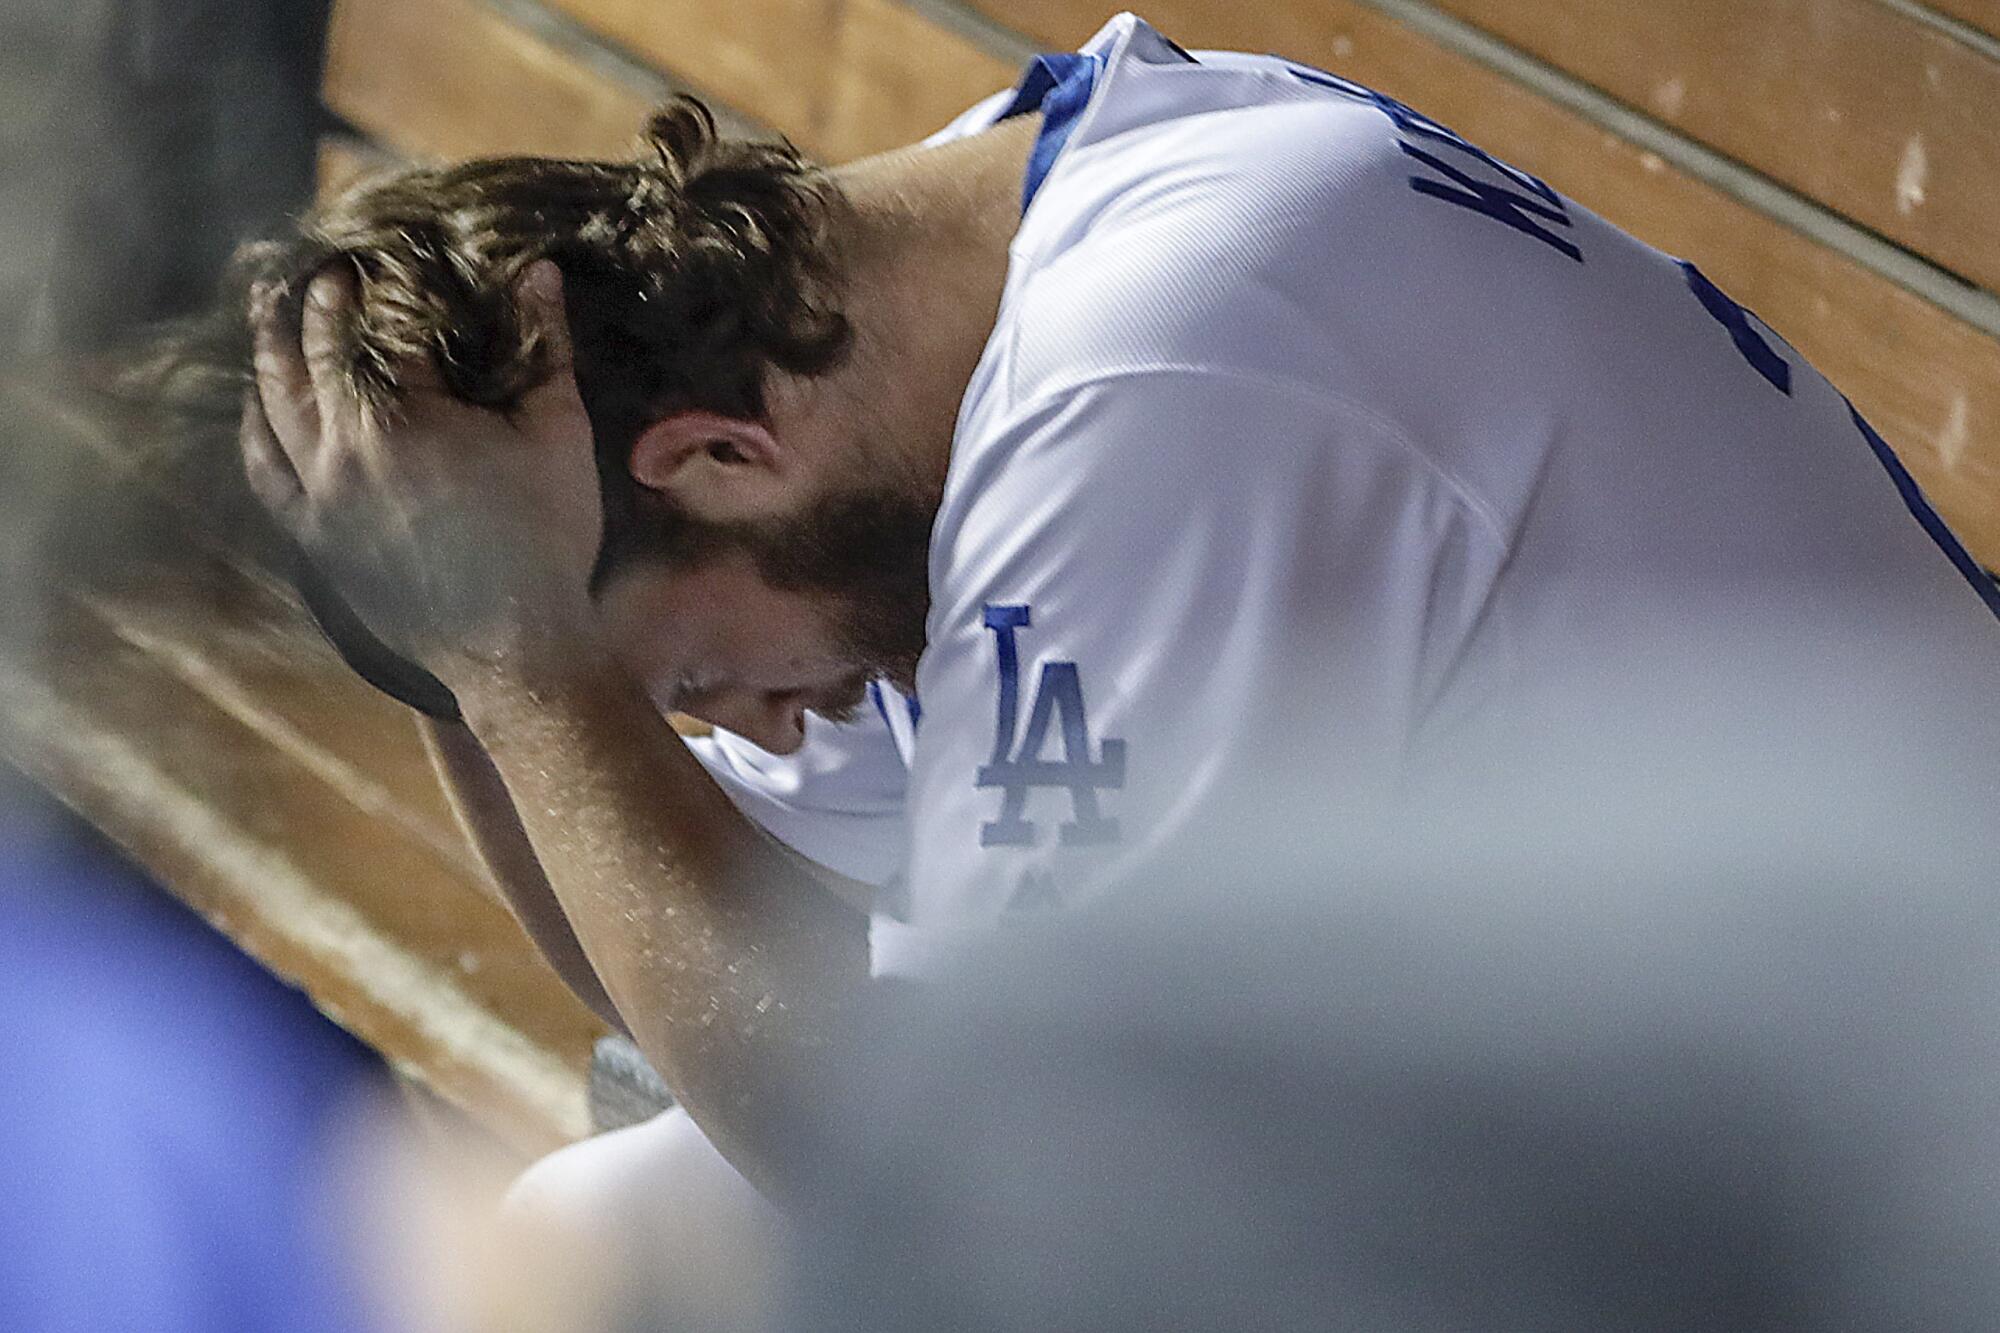 Clayton Kershaw in the dugout after giving up consecutive homers in the 8th inning in game 5 of the National League Division Series at Dodger Stadium.